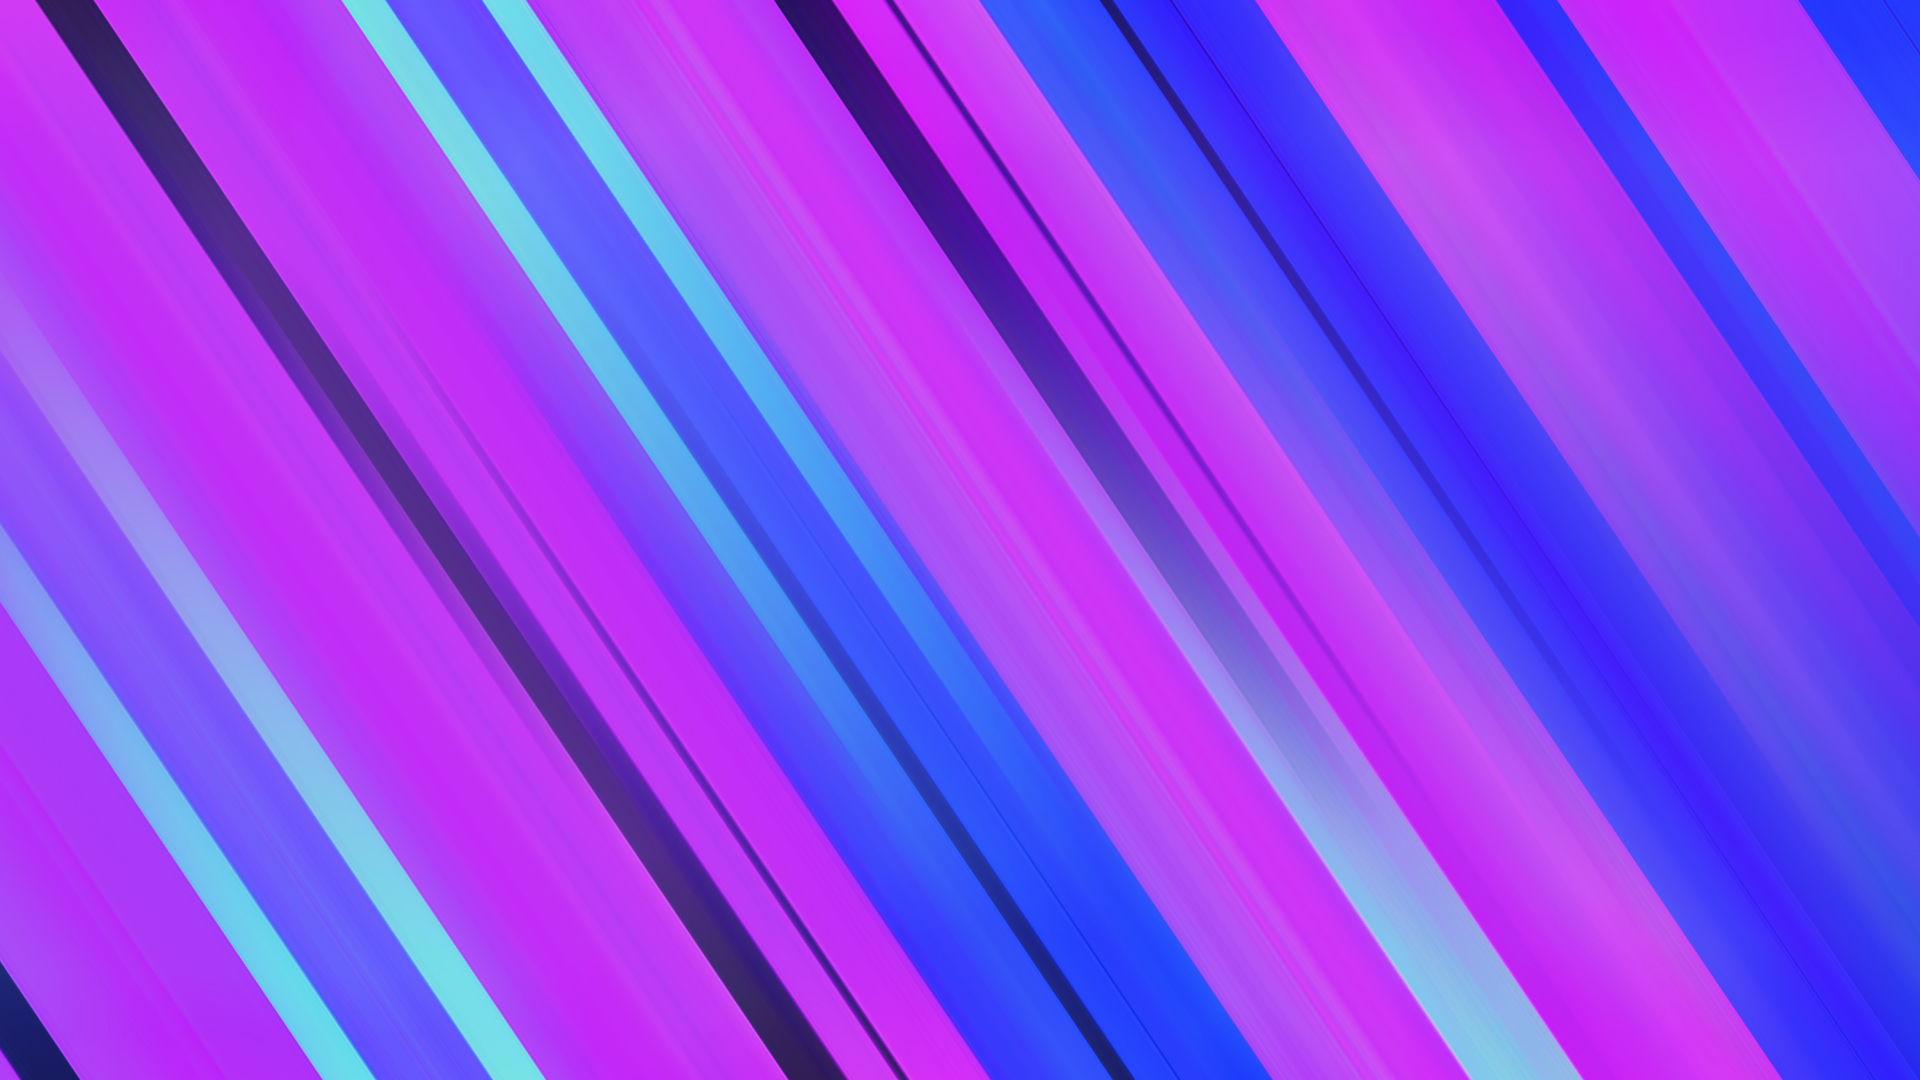 Abstract Diagonal Lines Colorful 1920x1080